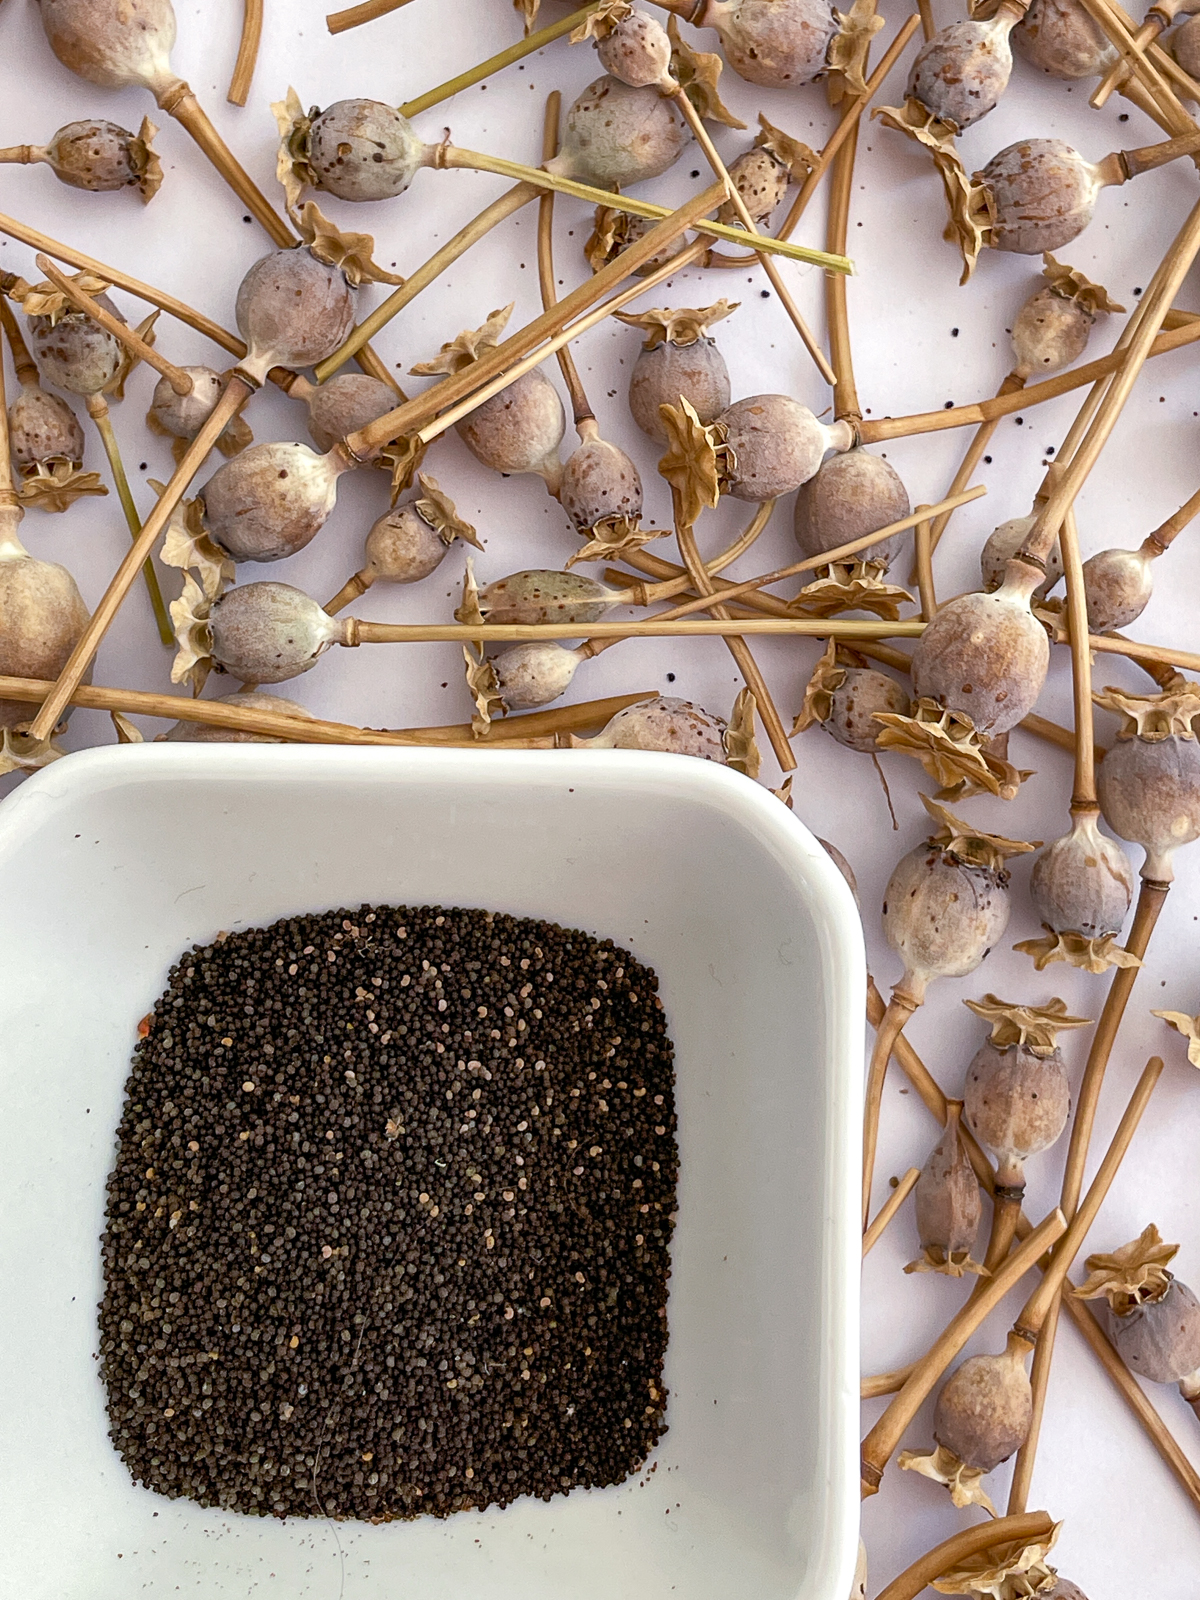 harvested poppy seeds in a white bowl with empty seed pods surrounding it